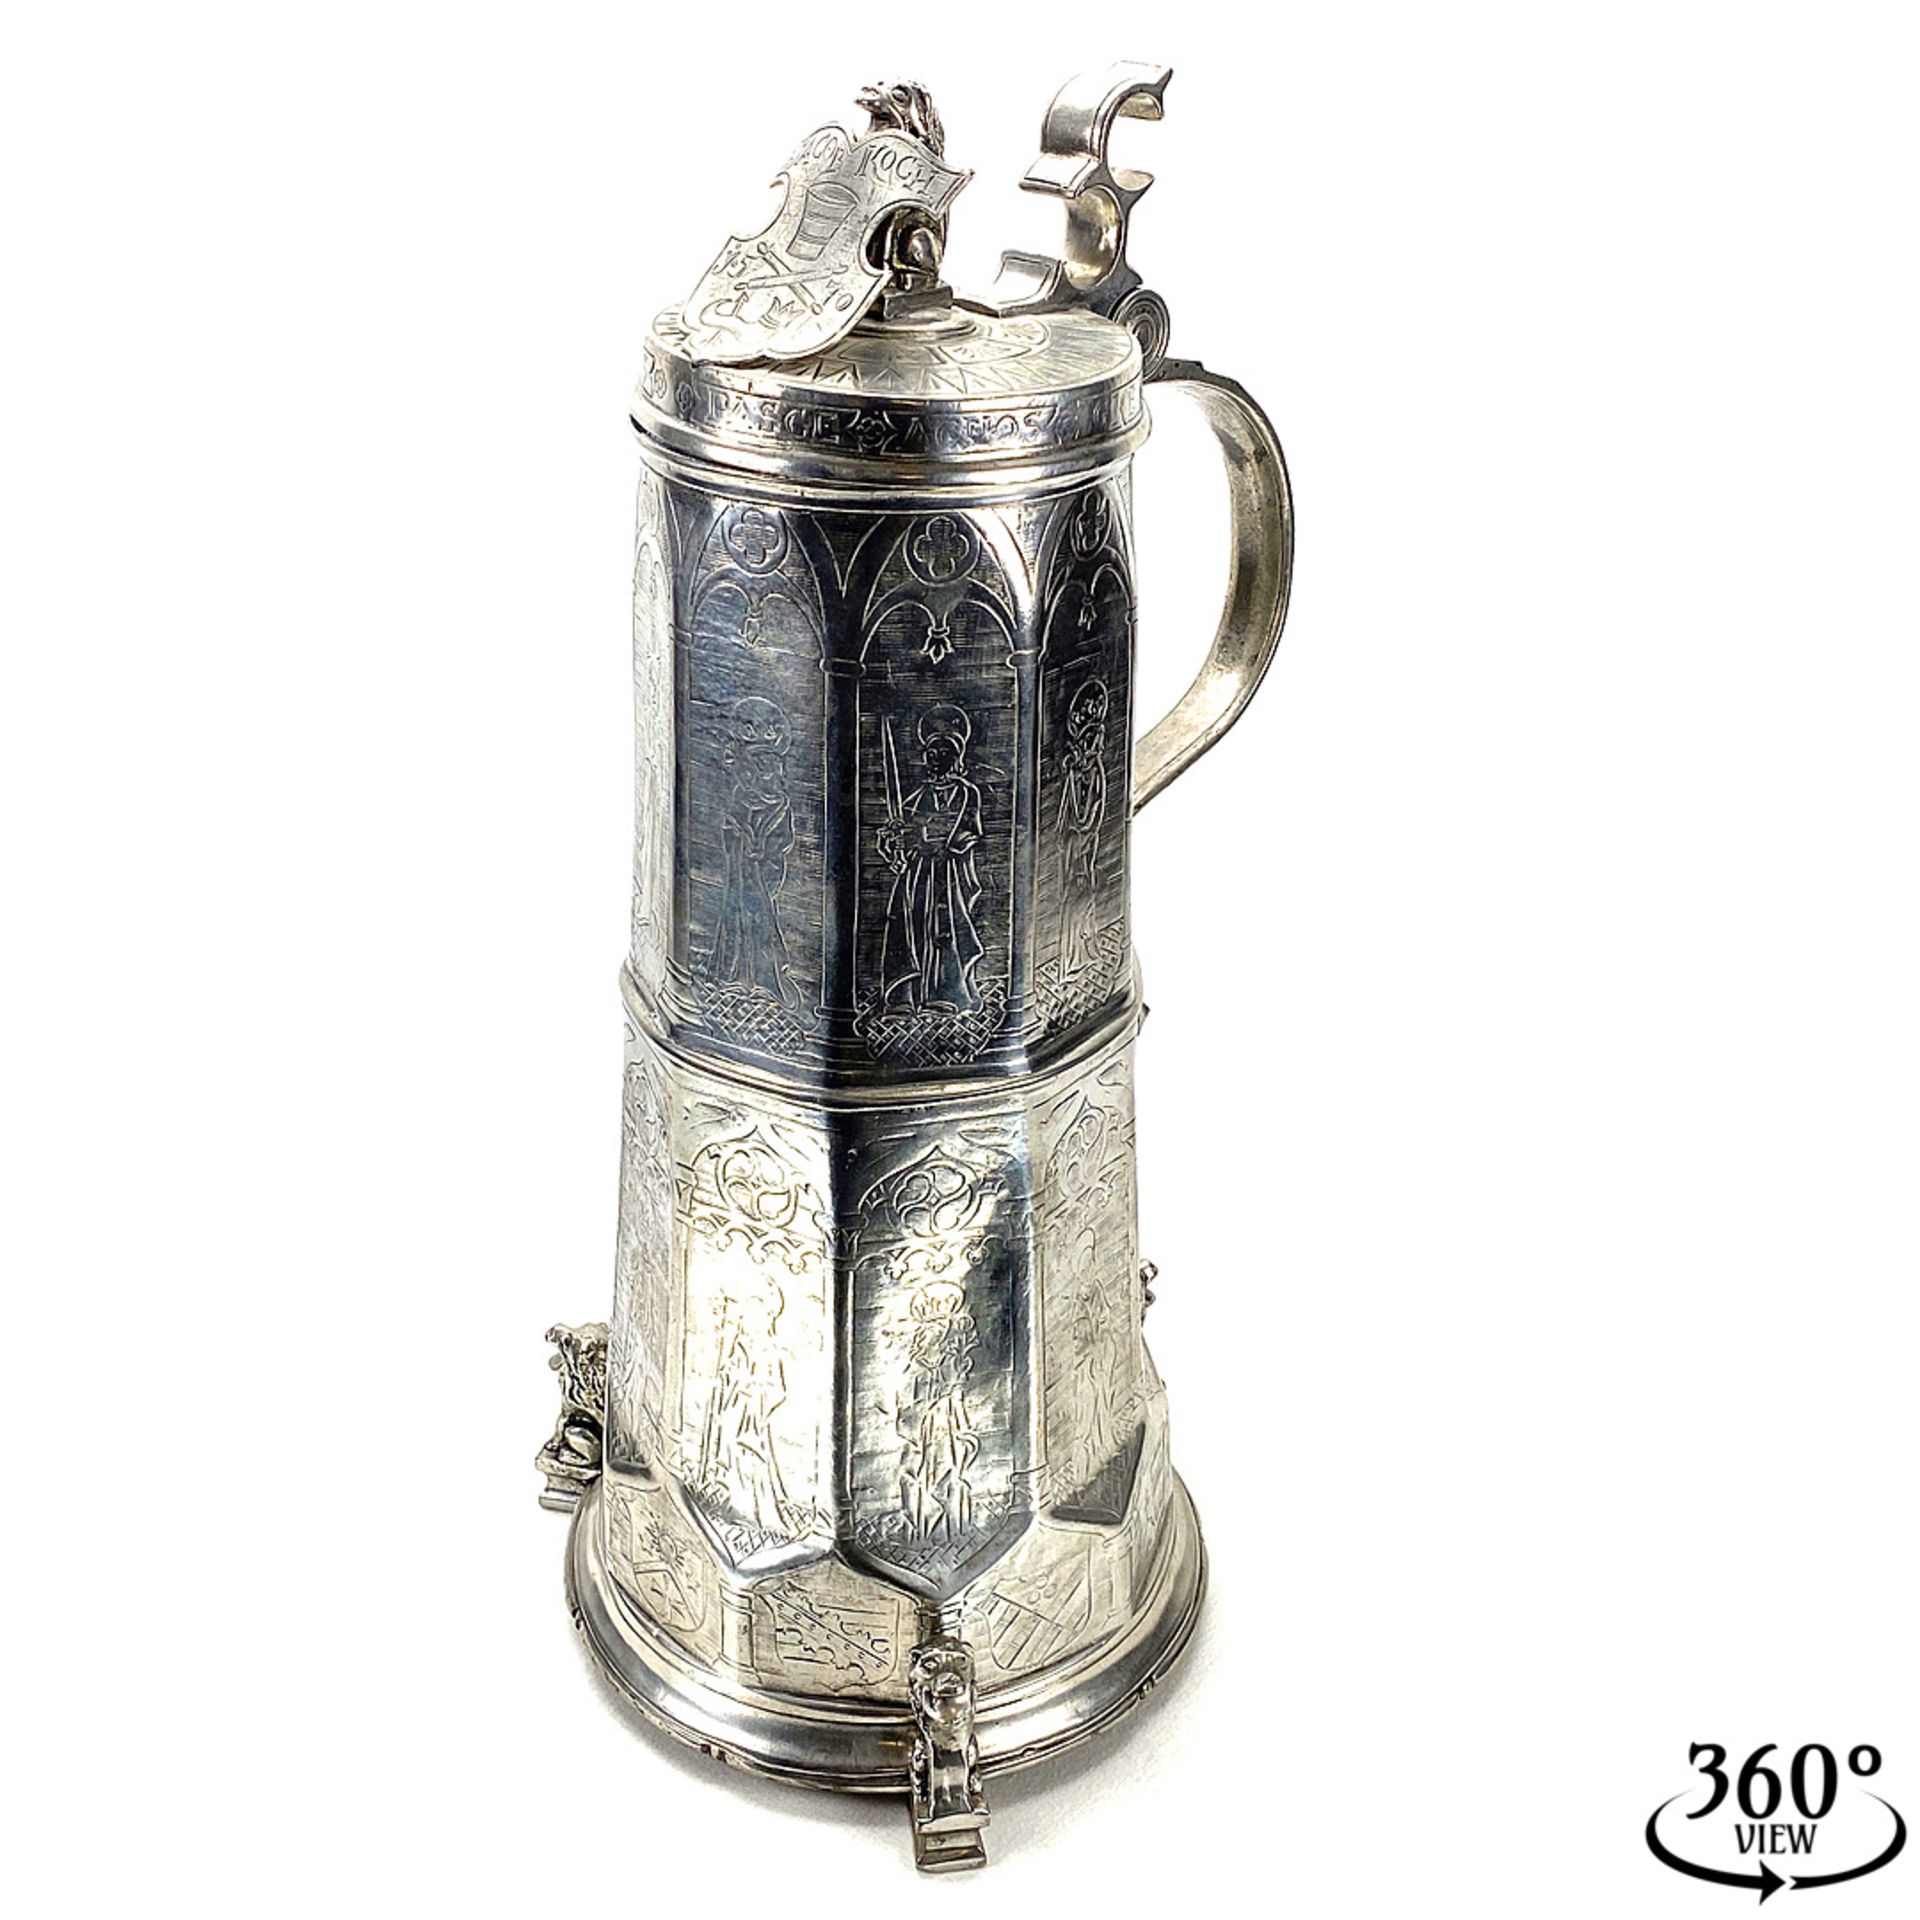 Large heavy pewter mug of Jacob Koch dated 1570, 1st half of the 20th century